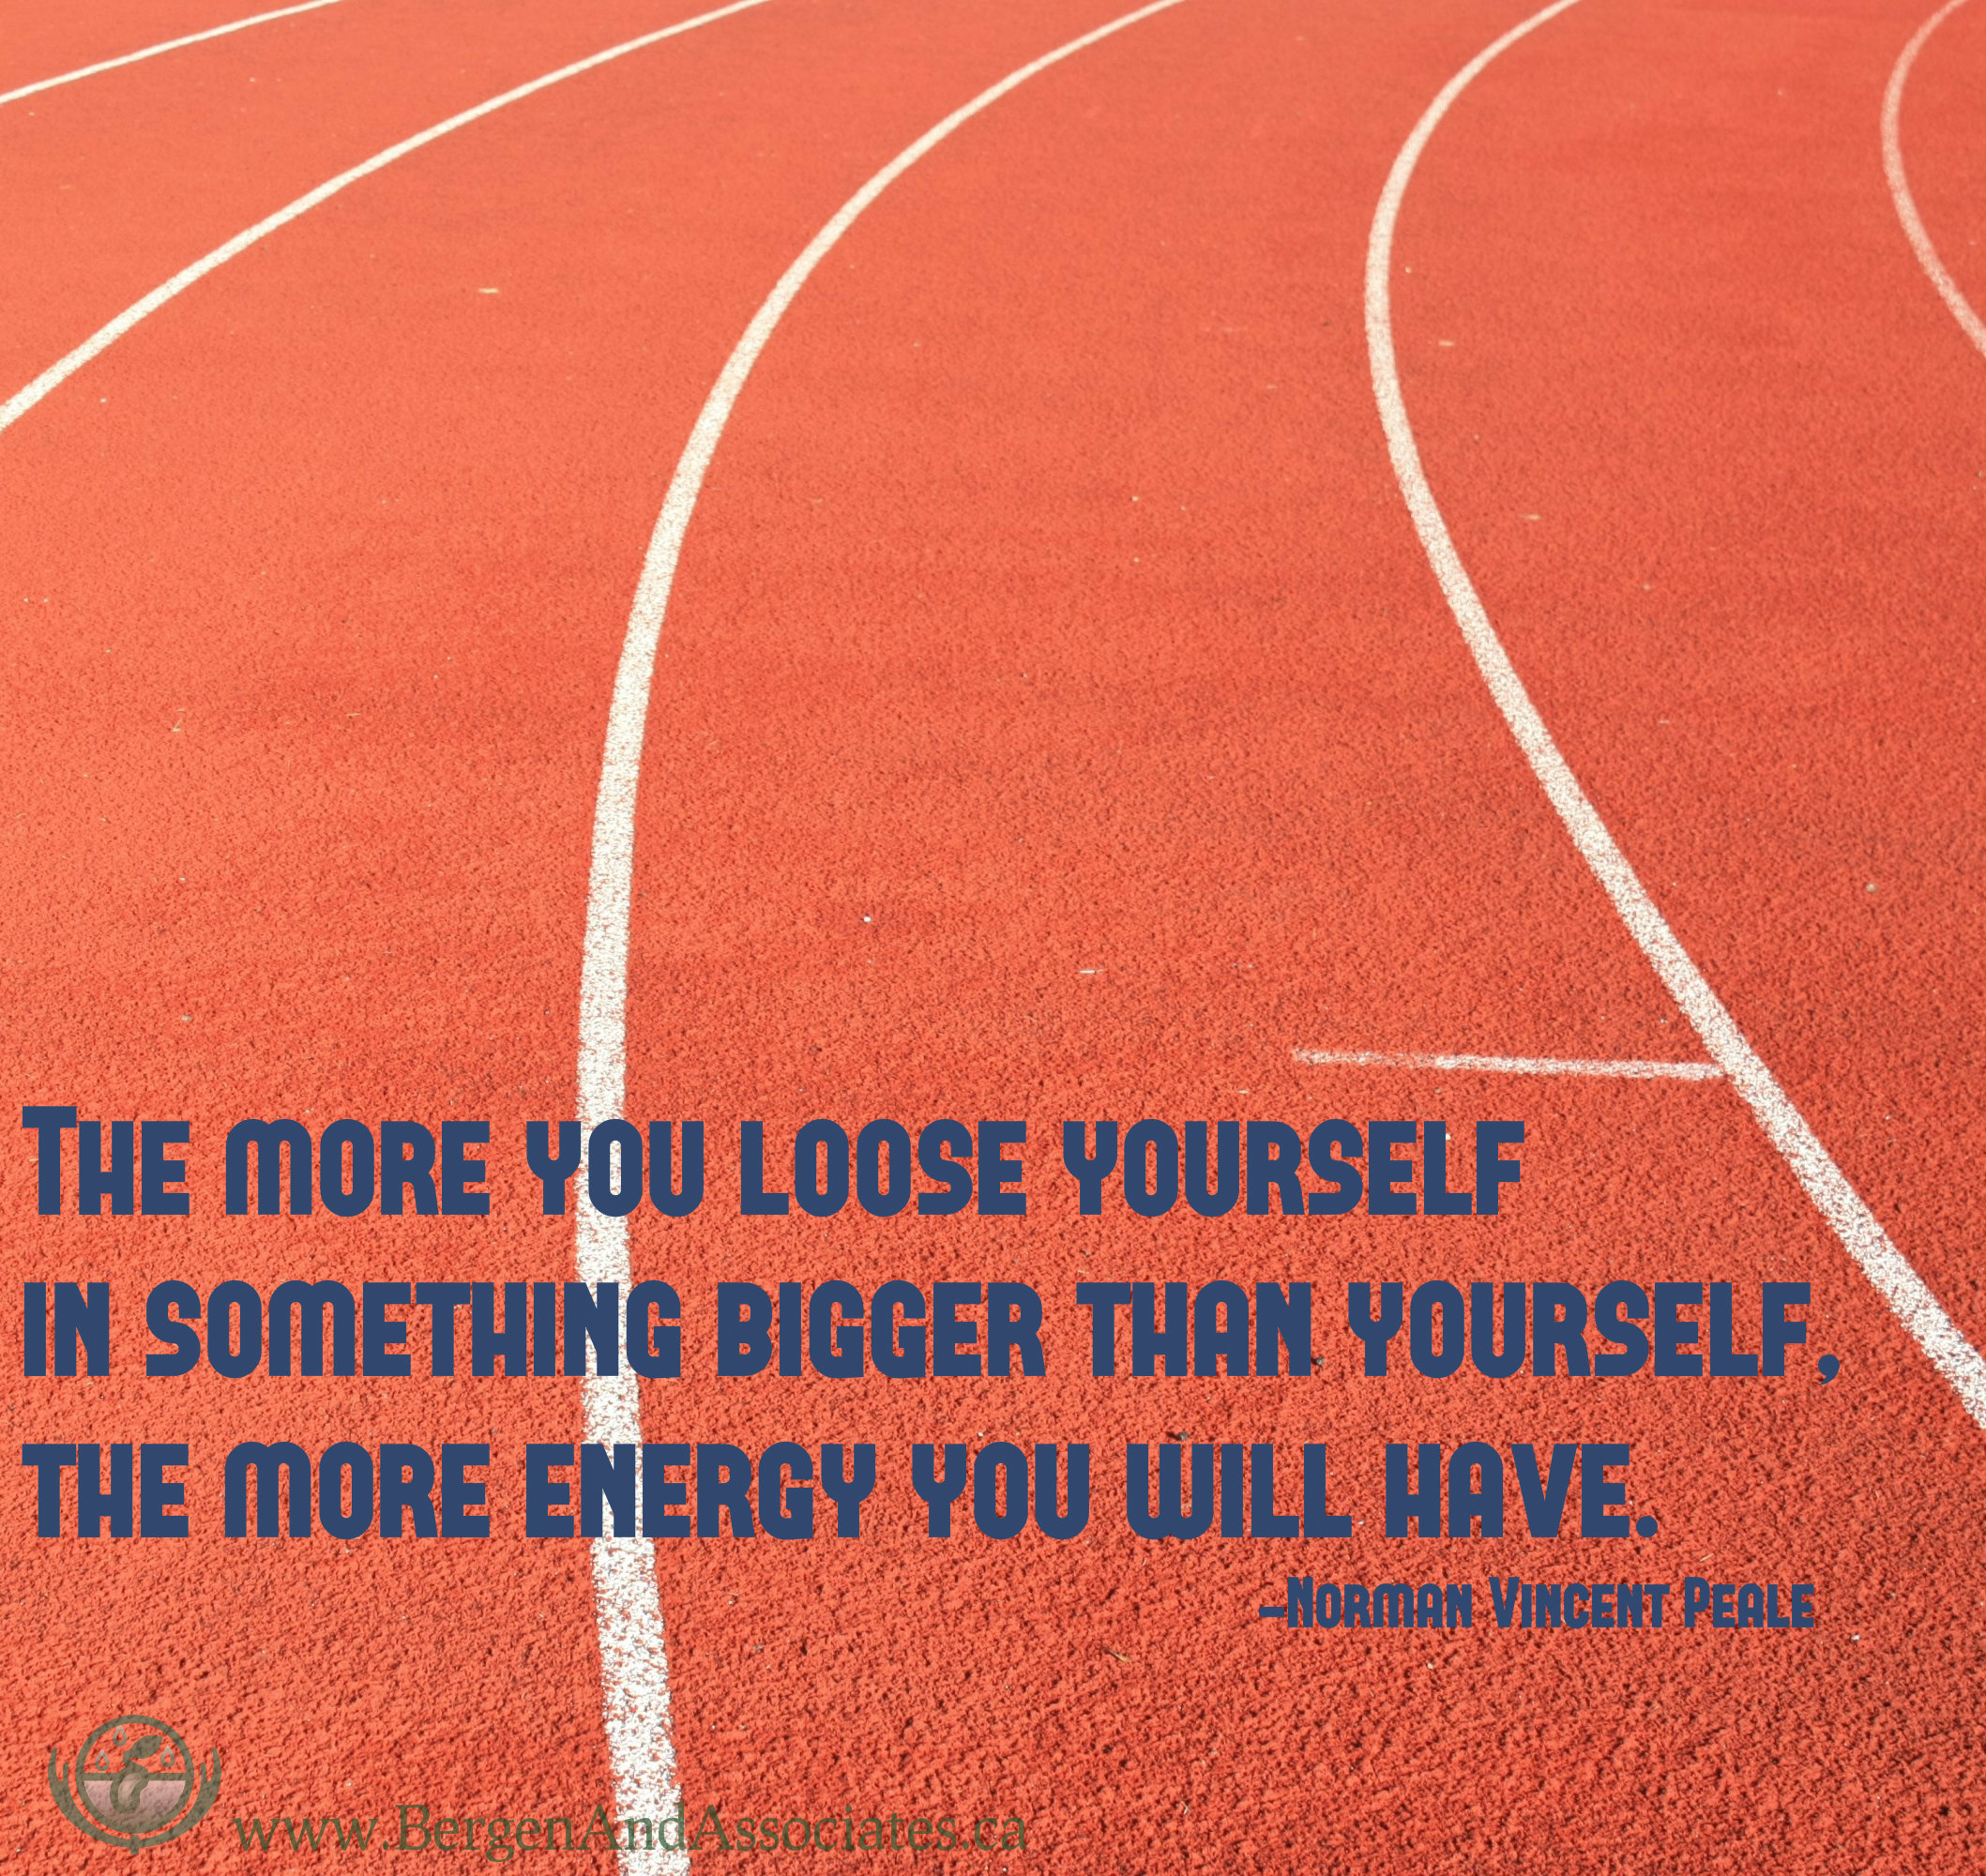 The more you loose yourself in something bigger than yourself, the more energy you will have. Norman Vincent Peale